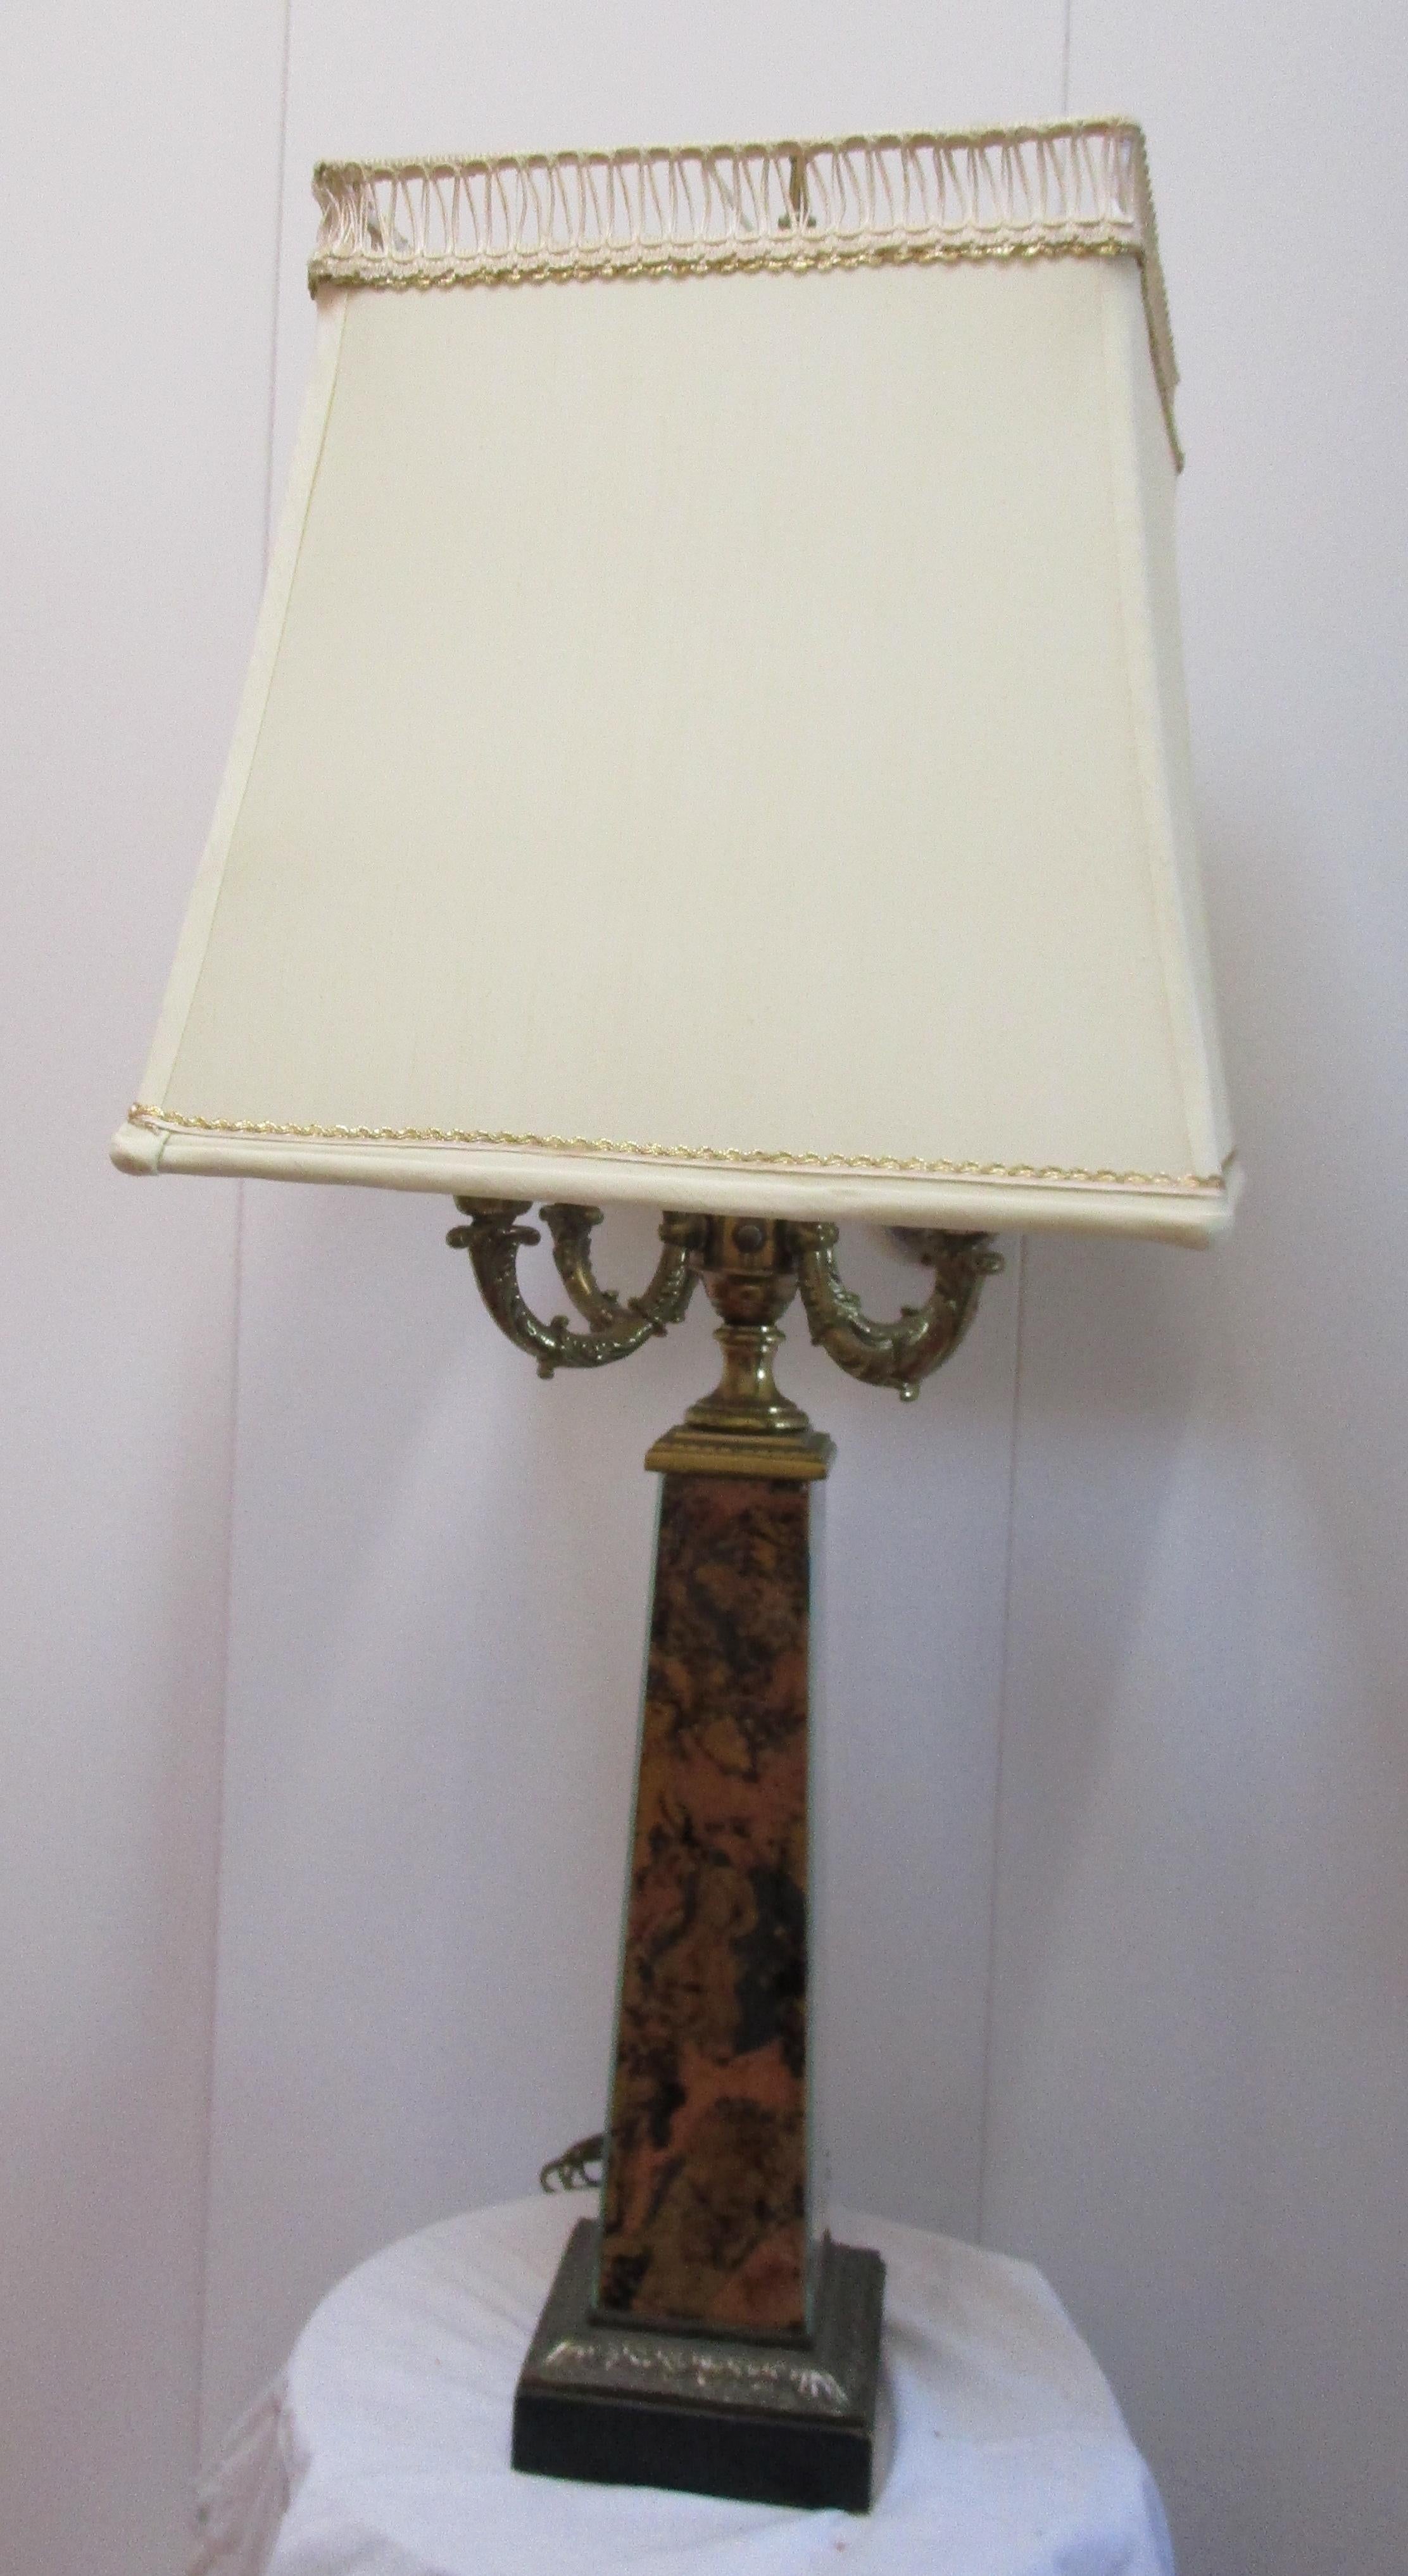 This is a rare and beautiful Victorian era lamp. It was converted from a candelabra at some point in its history. It is surmounted by a silk box shade in eggshell colored silk with metal trim that has been completely restored. The lamp with four